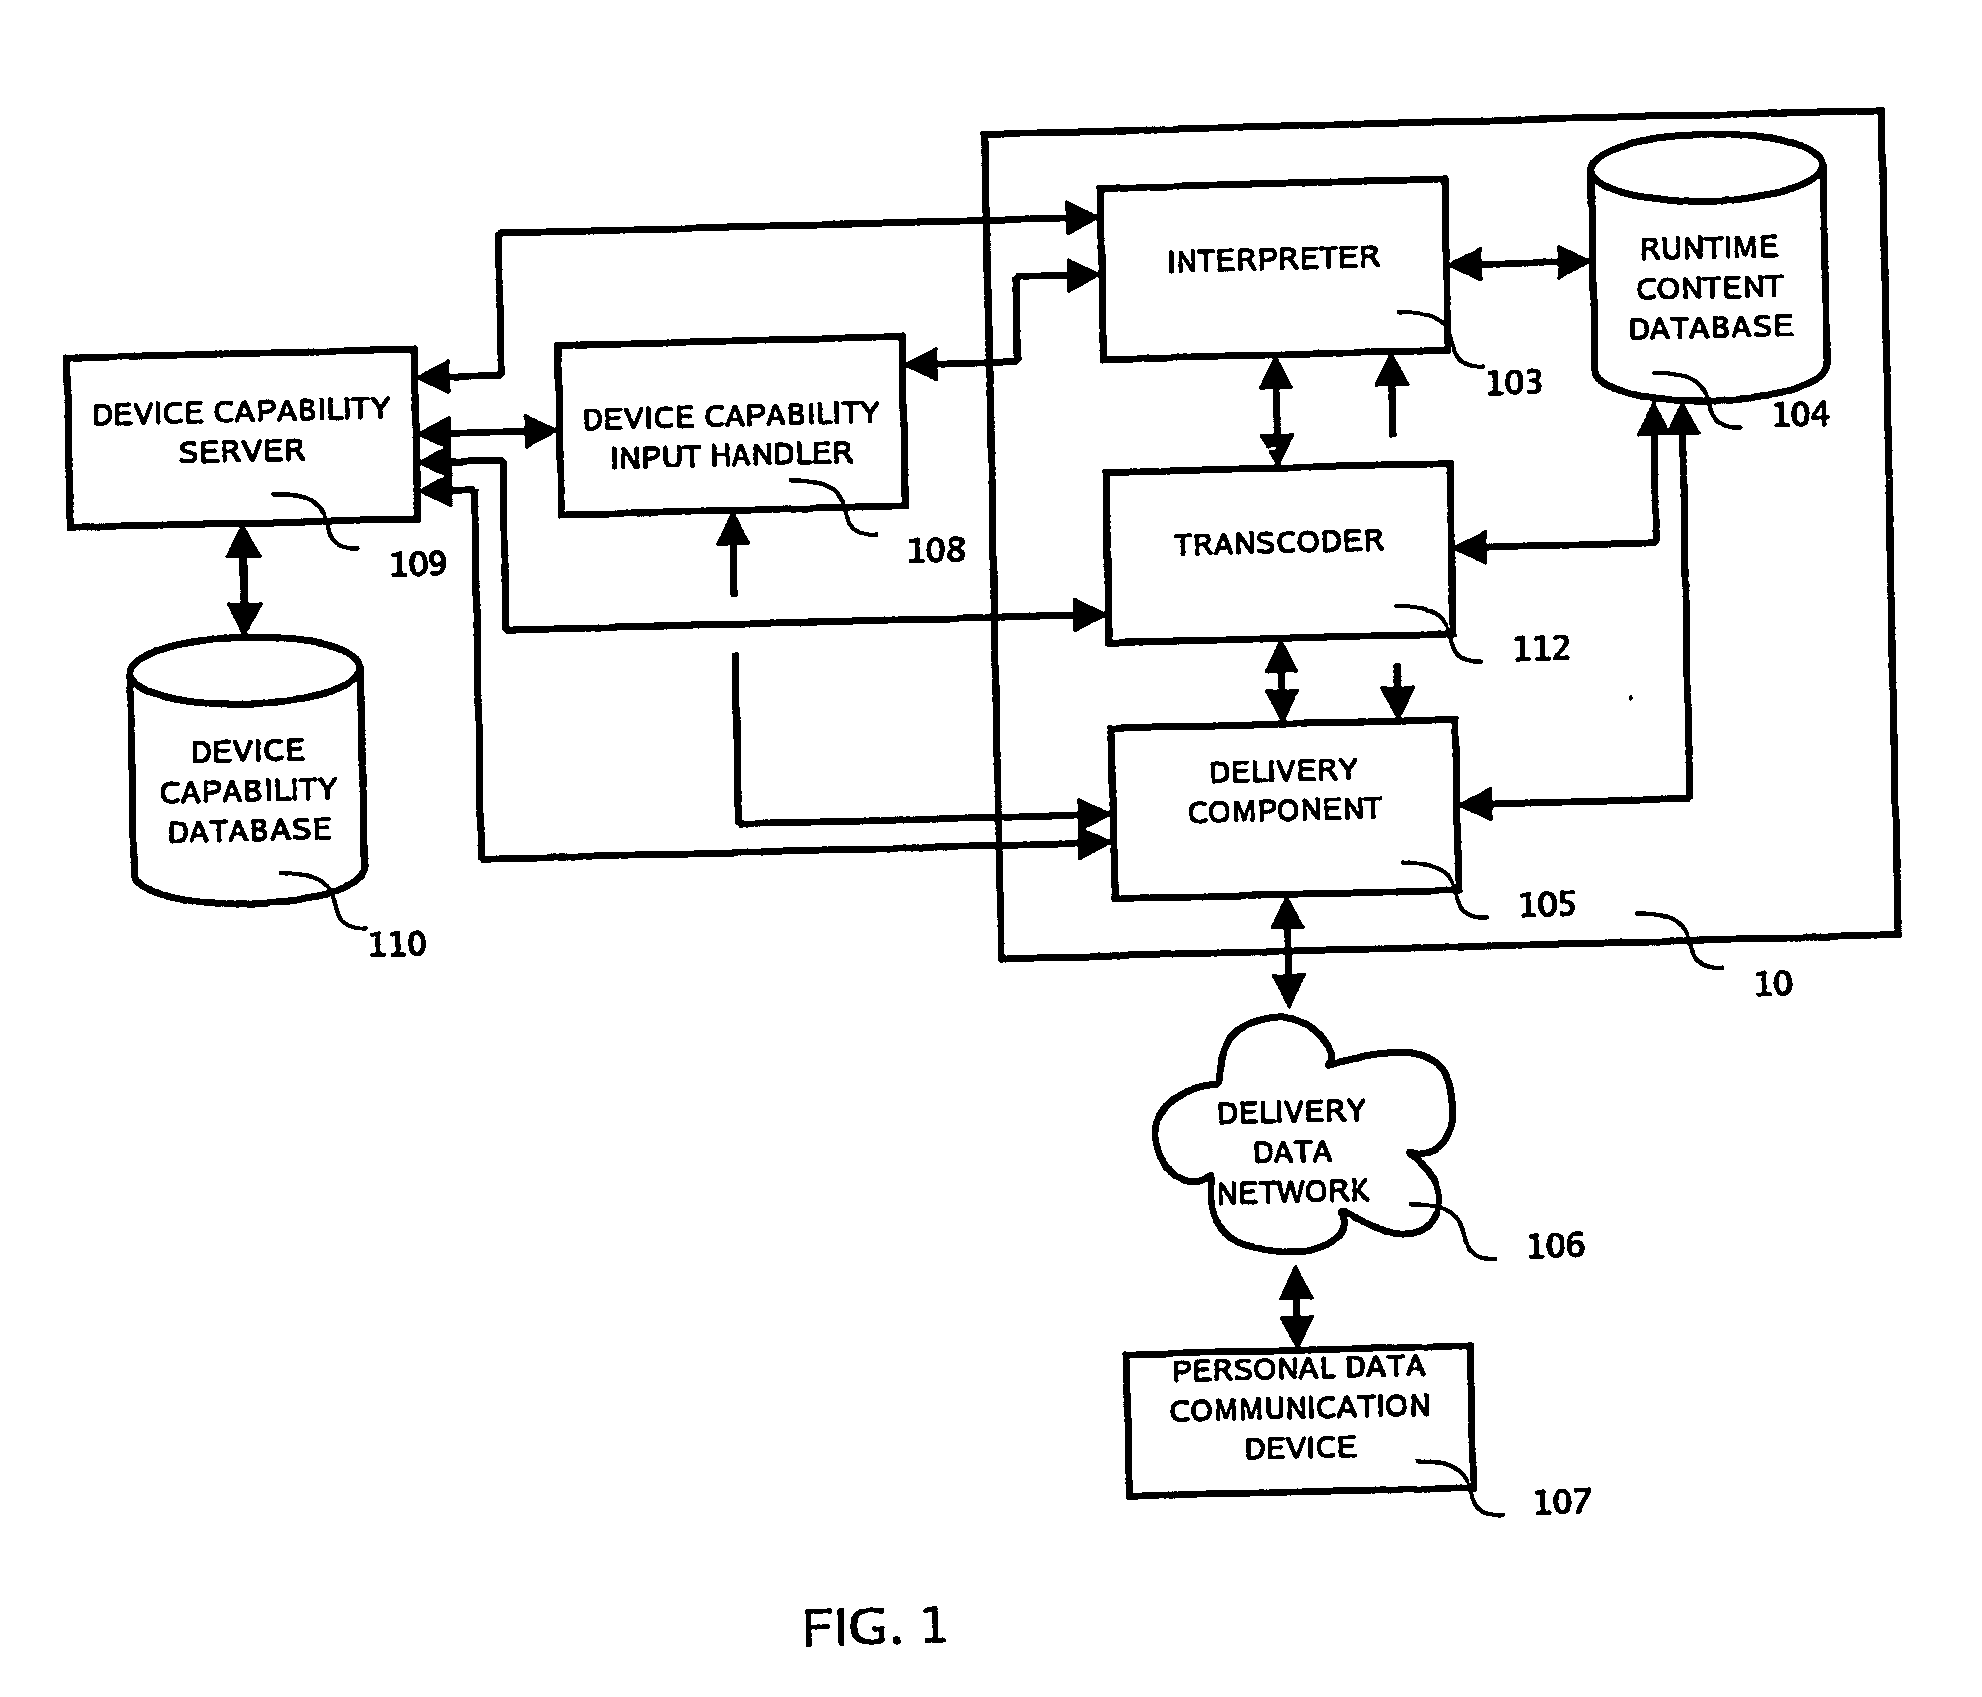 System and method for determining and delivering appropriate multimedia content to data communication devices